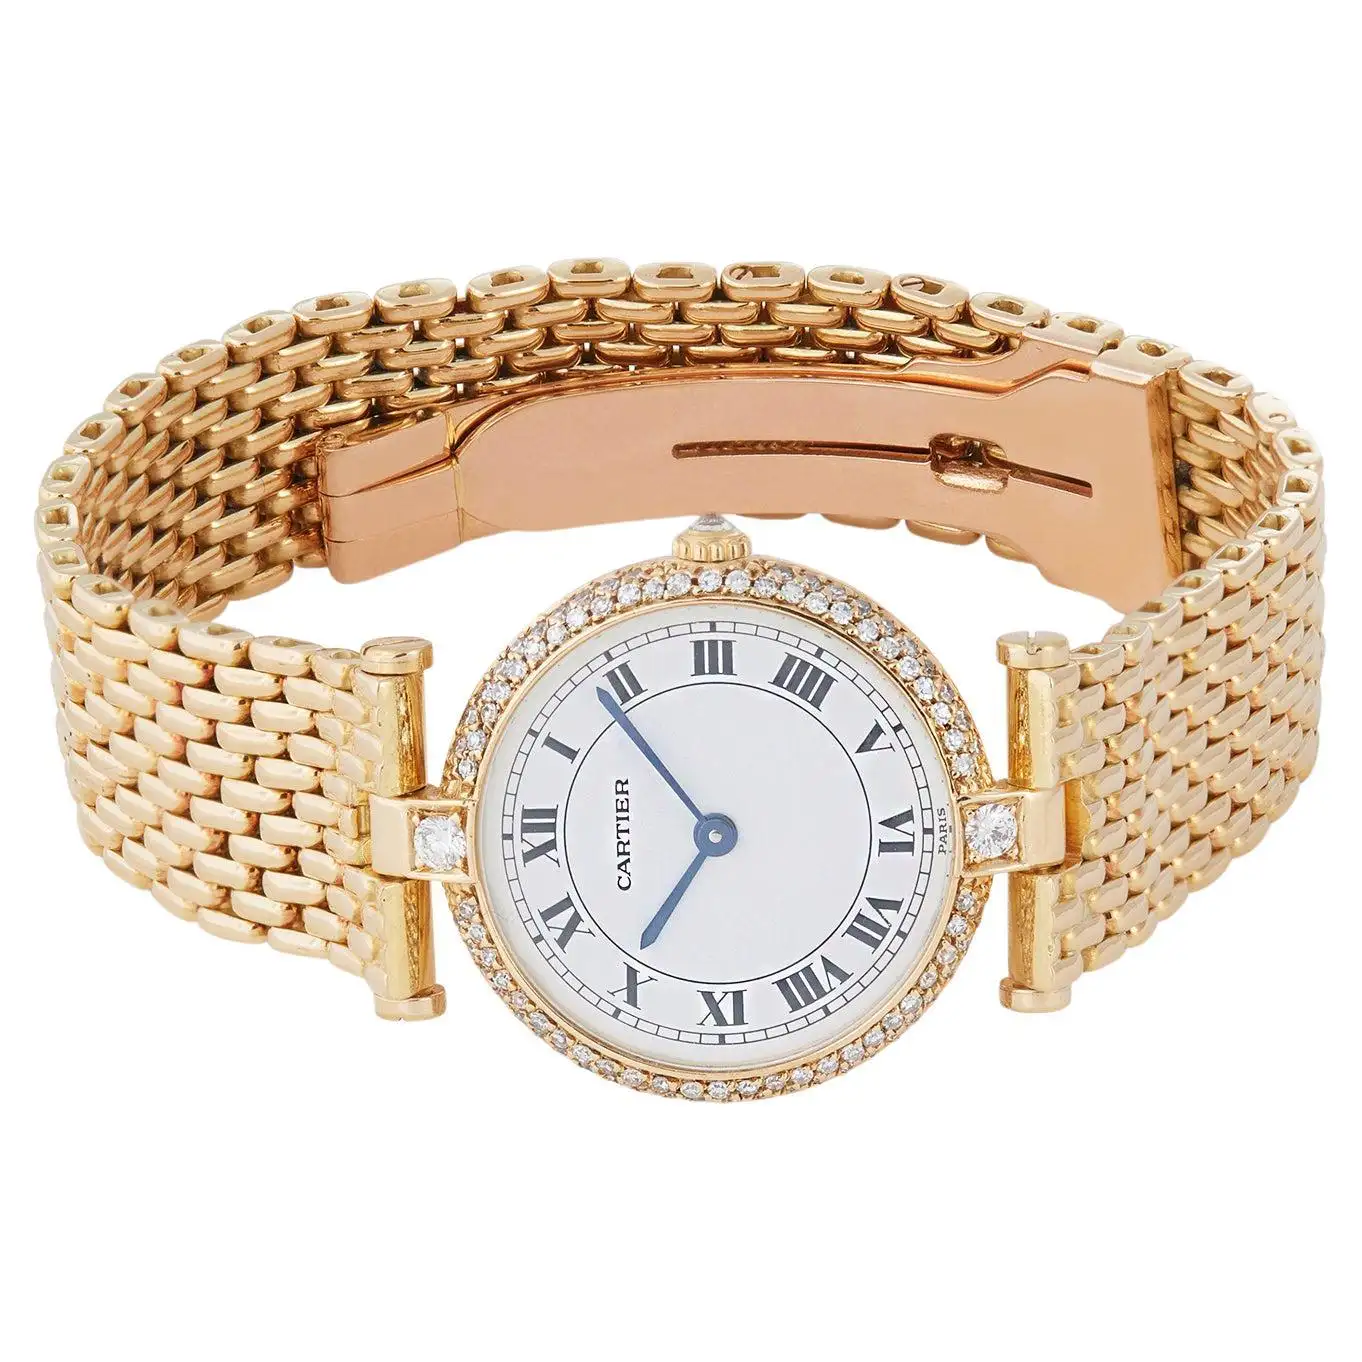 Buy-Cartier-Vendome-Ref.-834501A6-Gold-and-Diamond-Watch-7.webp